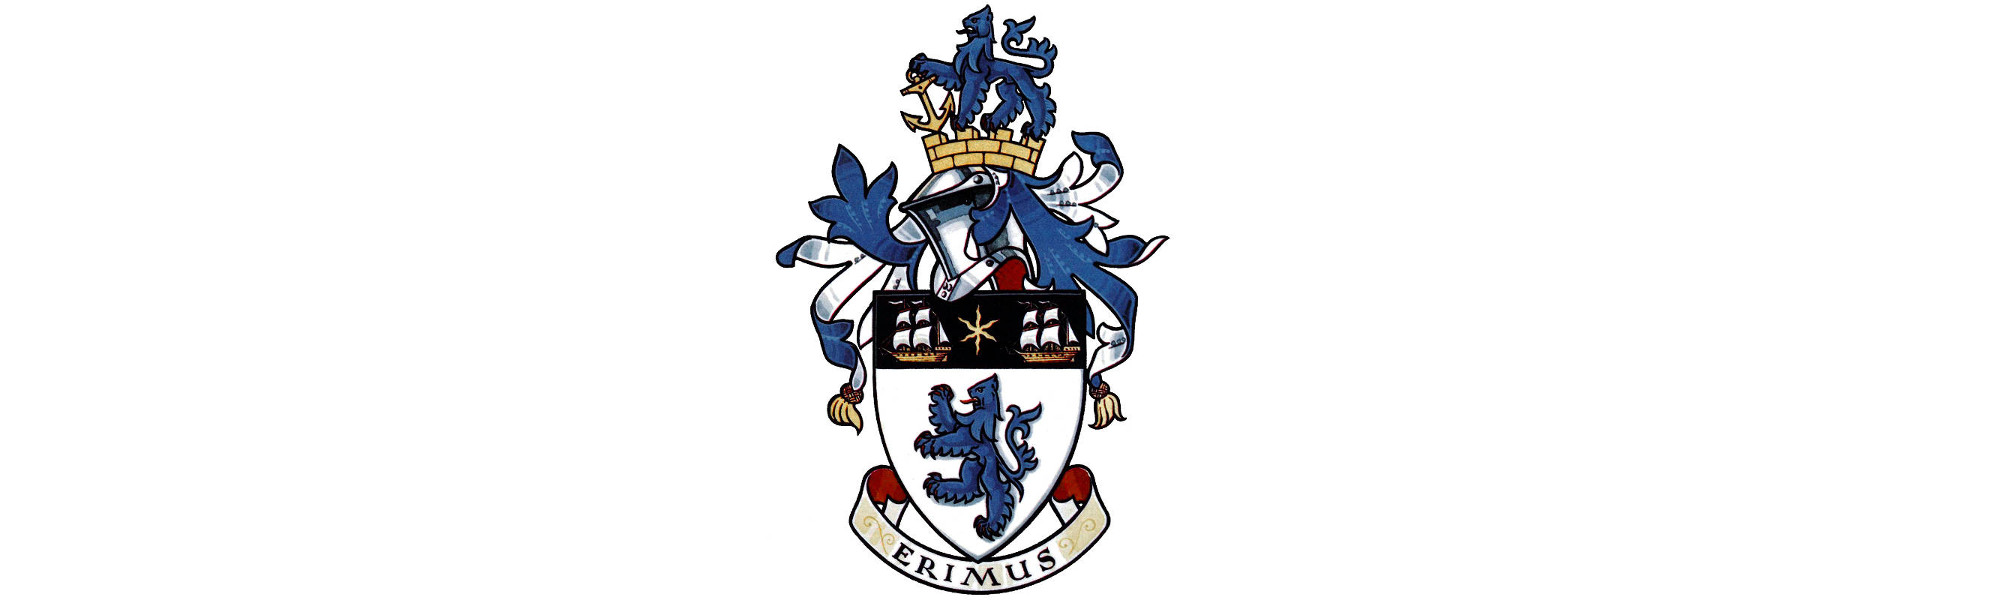 Middlesbrough's coat of arms